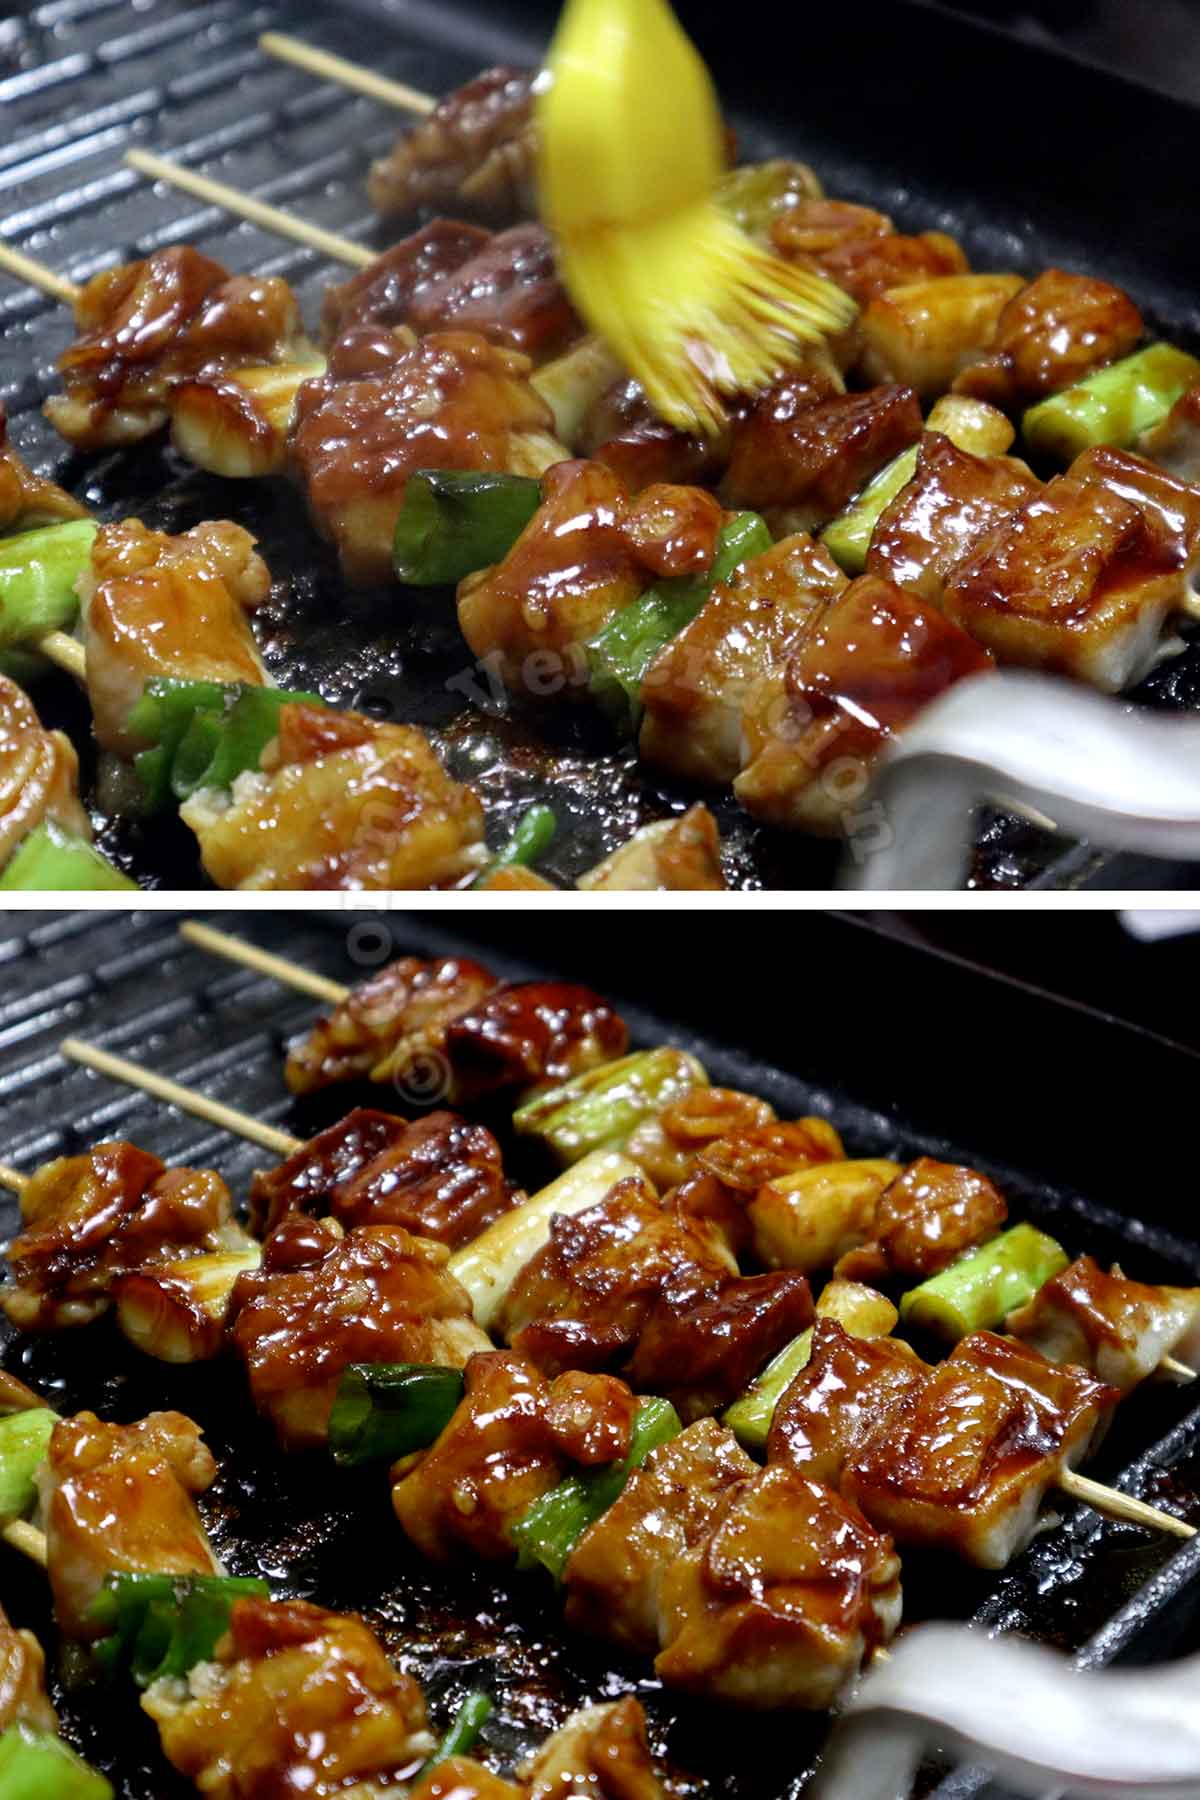 Brushing tare sauce on skewered chicken and scallions on stovetop grill